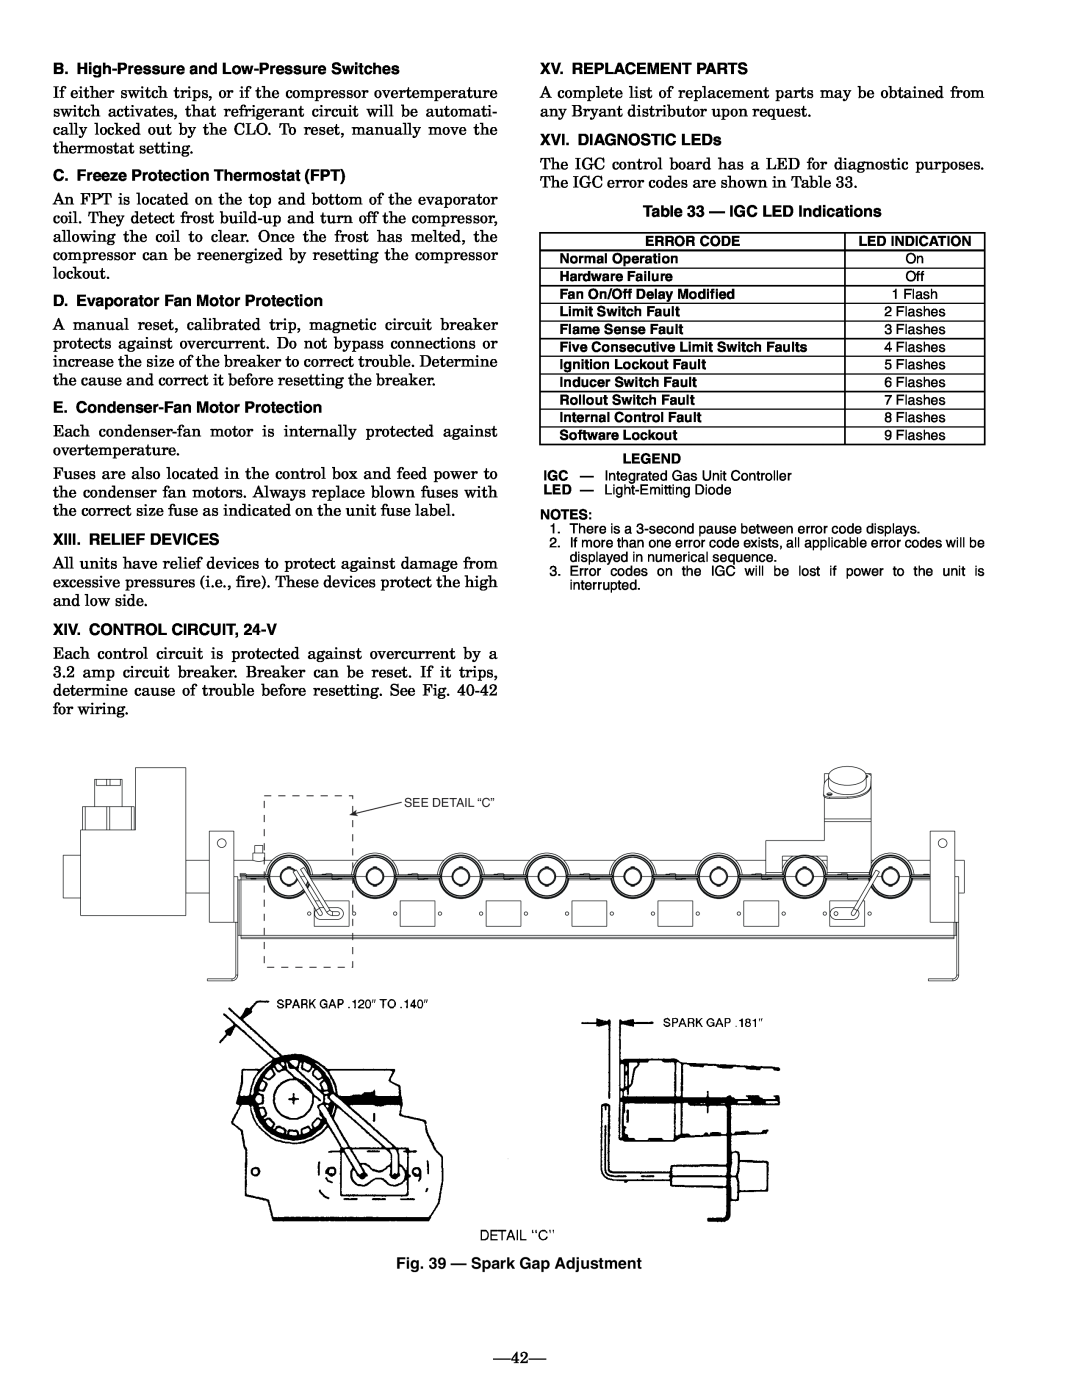 Bryant 581A B. High-Pressureand Low-PressureSwitches, C. Freeze Protection Thermostat FPT, Xiii. Relief Devices 